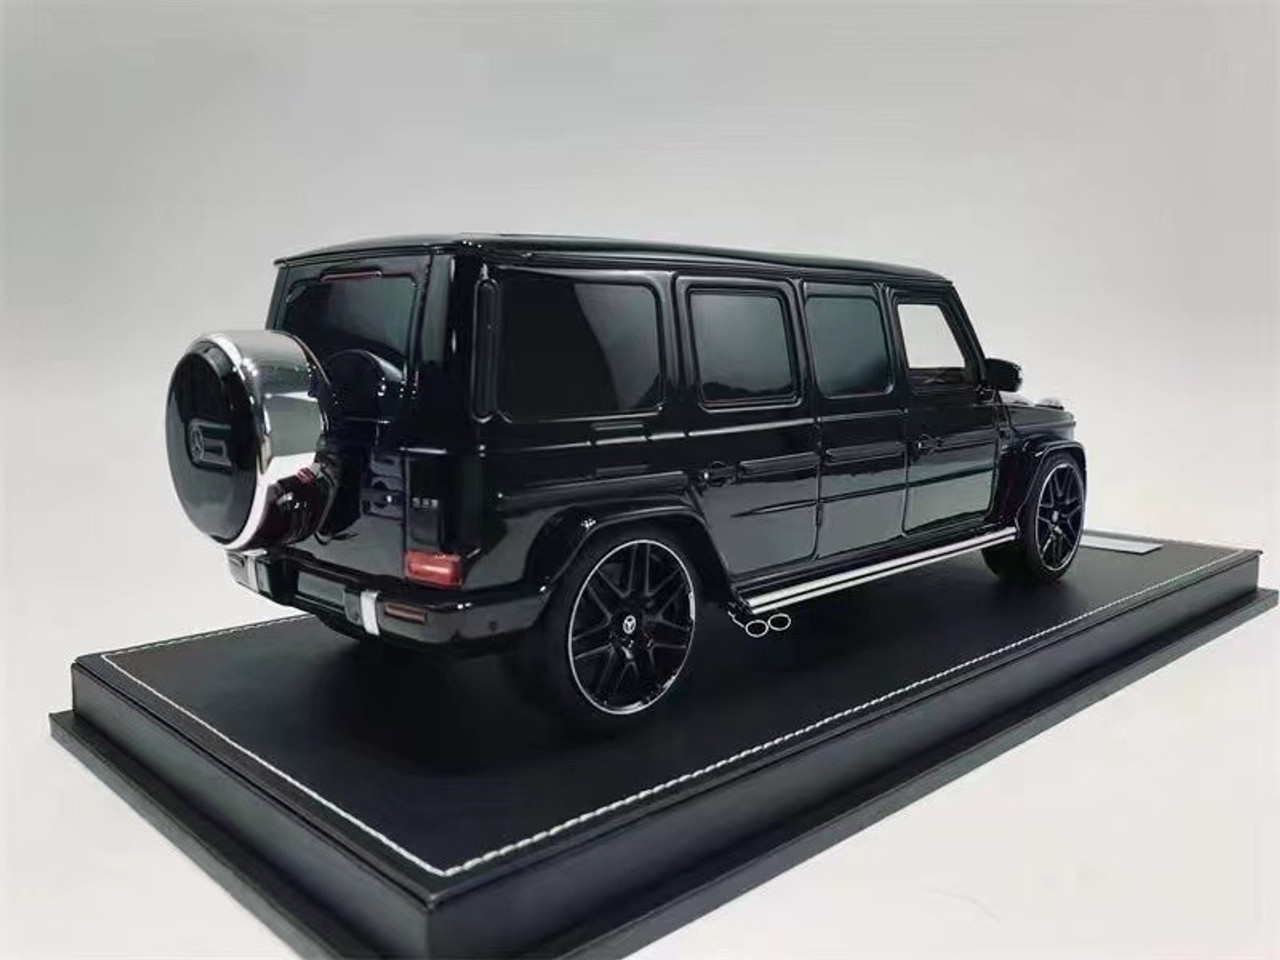 1/18 VIP Scale Model Mercedes-Benz G-Class G63 AMG Extended Limo